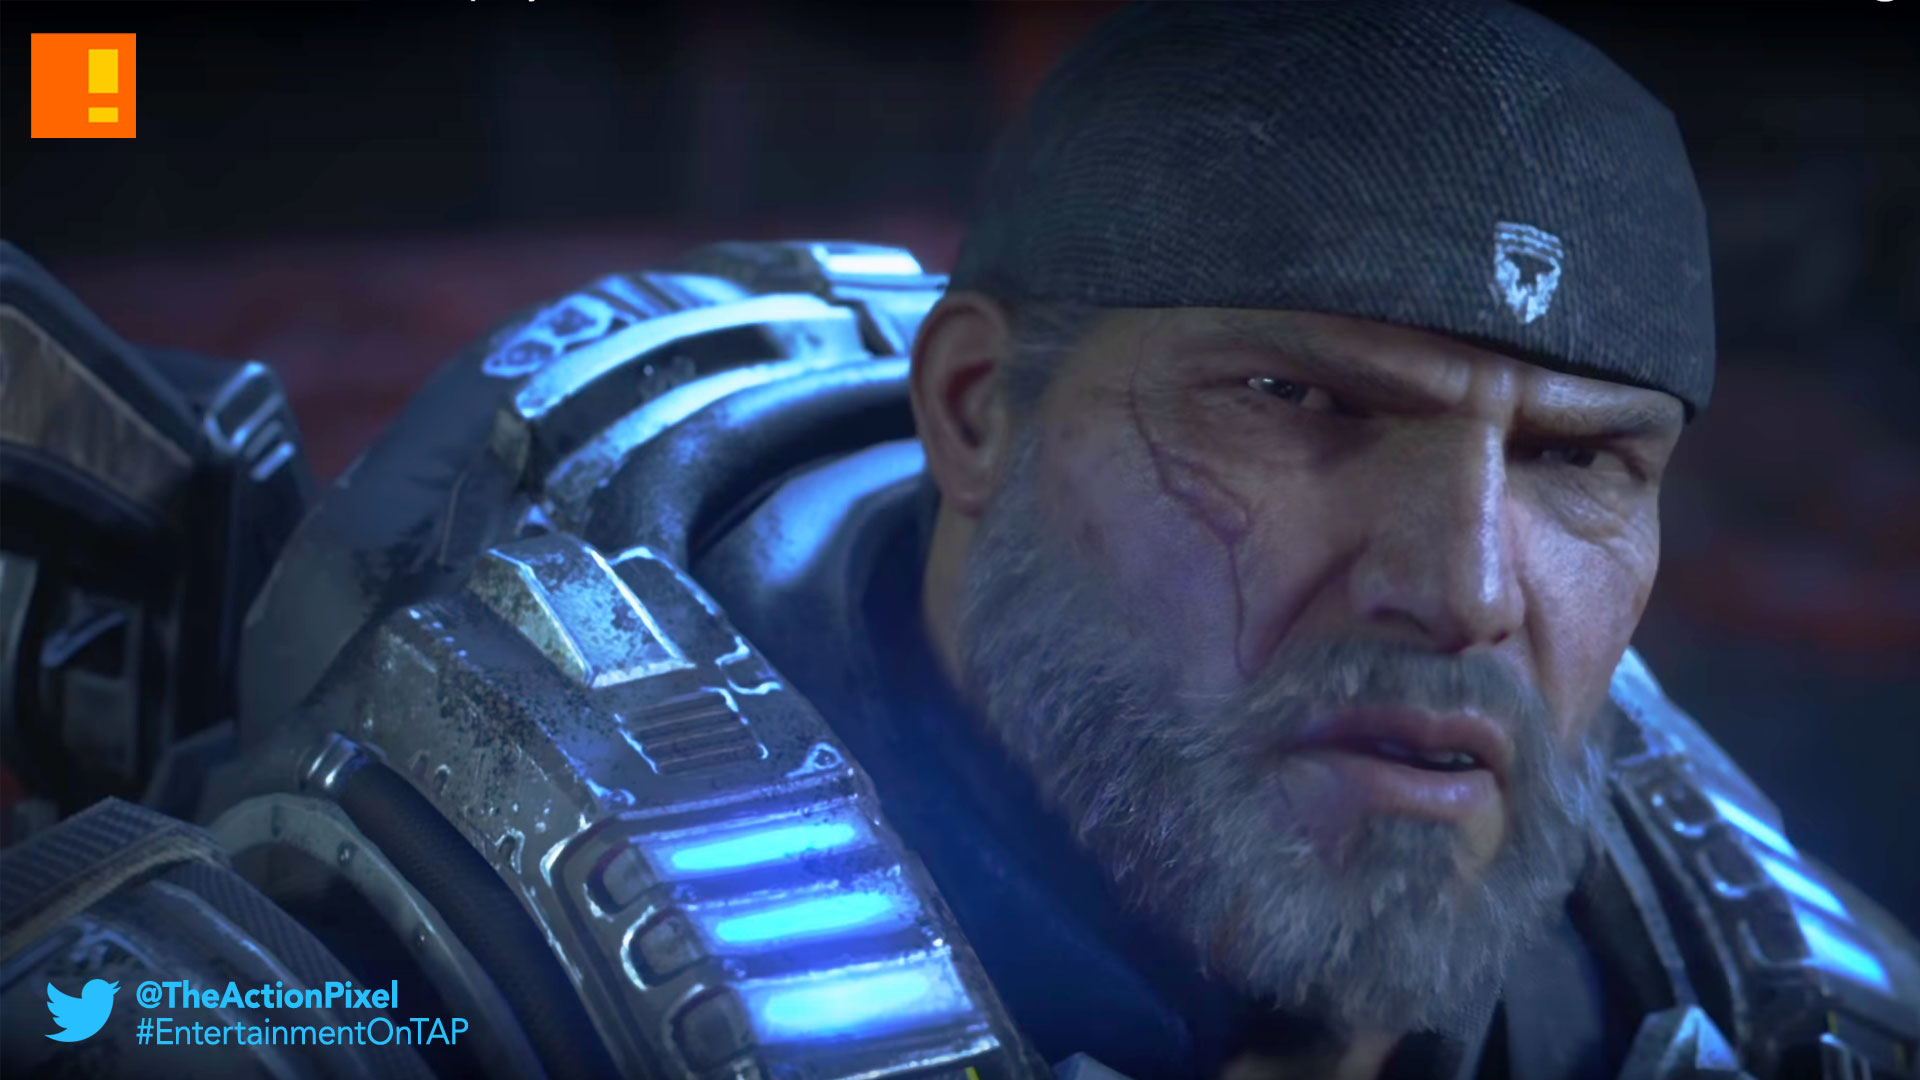 gears of war 4, gears of war, the coalition, fenix, trailer, launch trailer, the action pixel, entertainment on tap